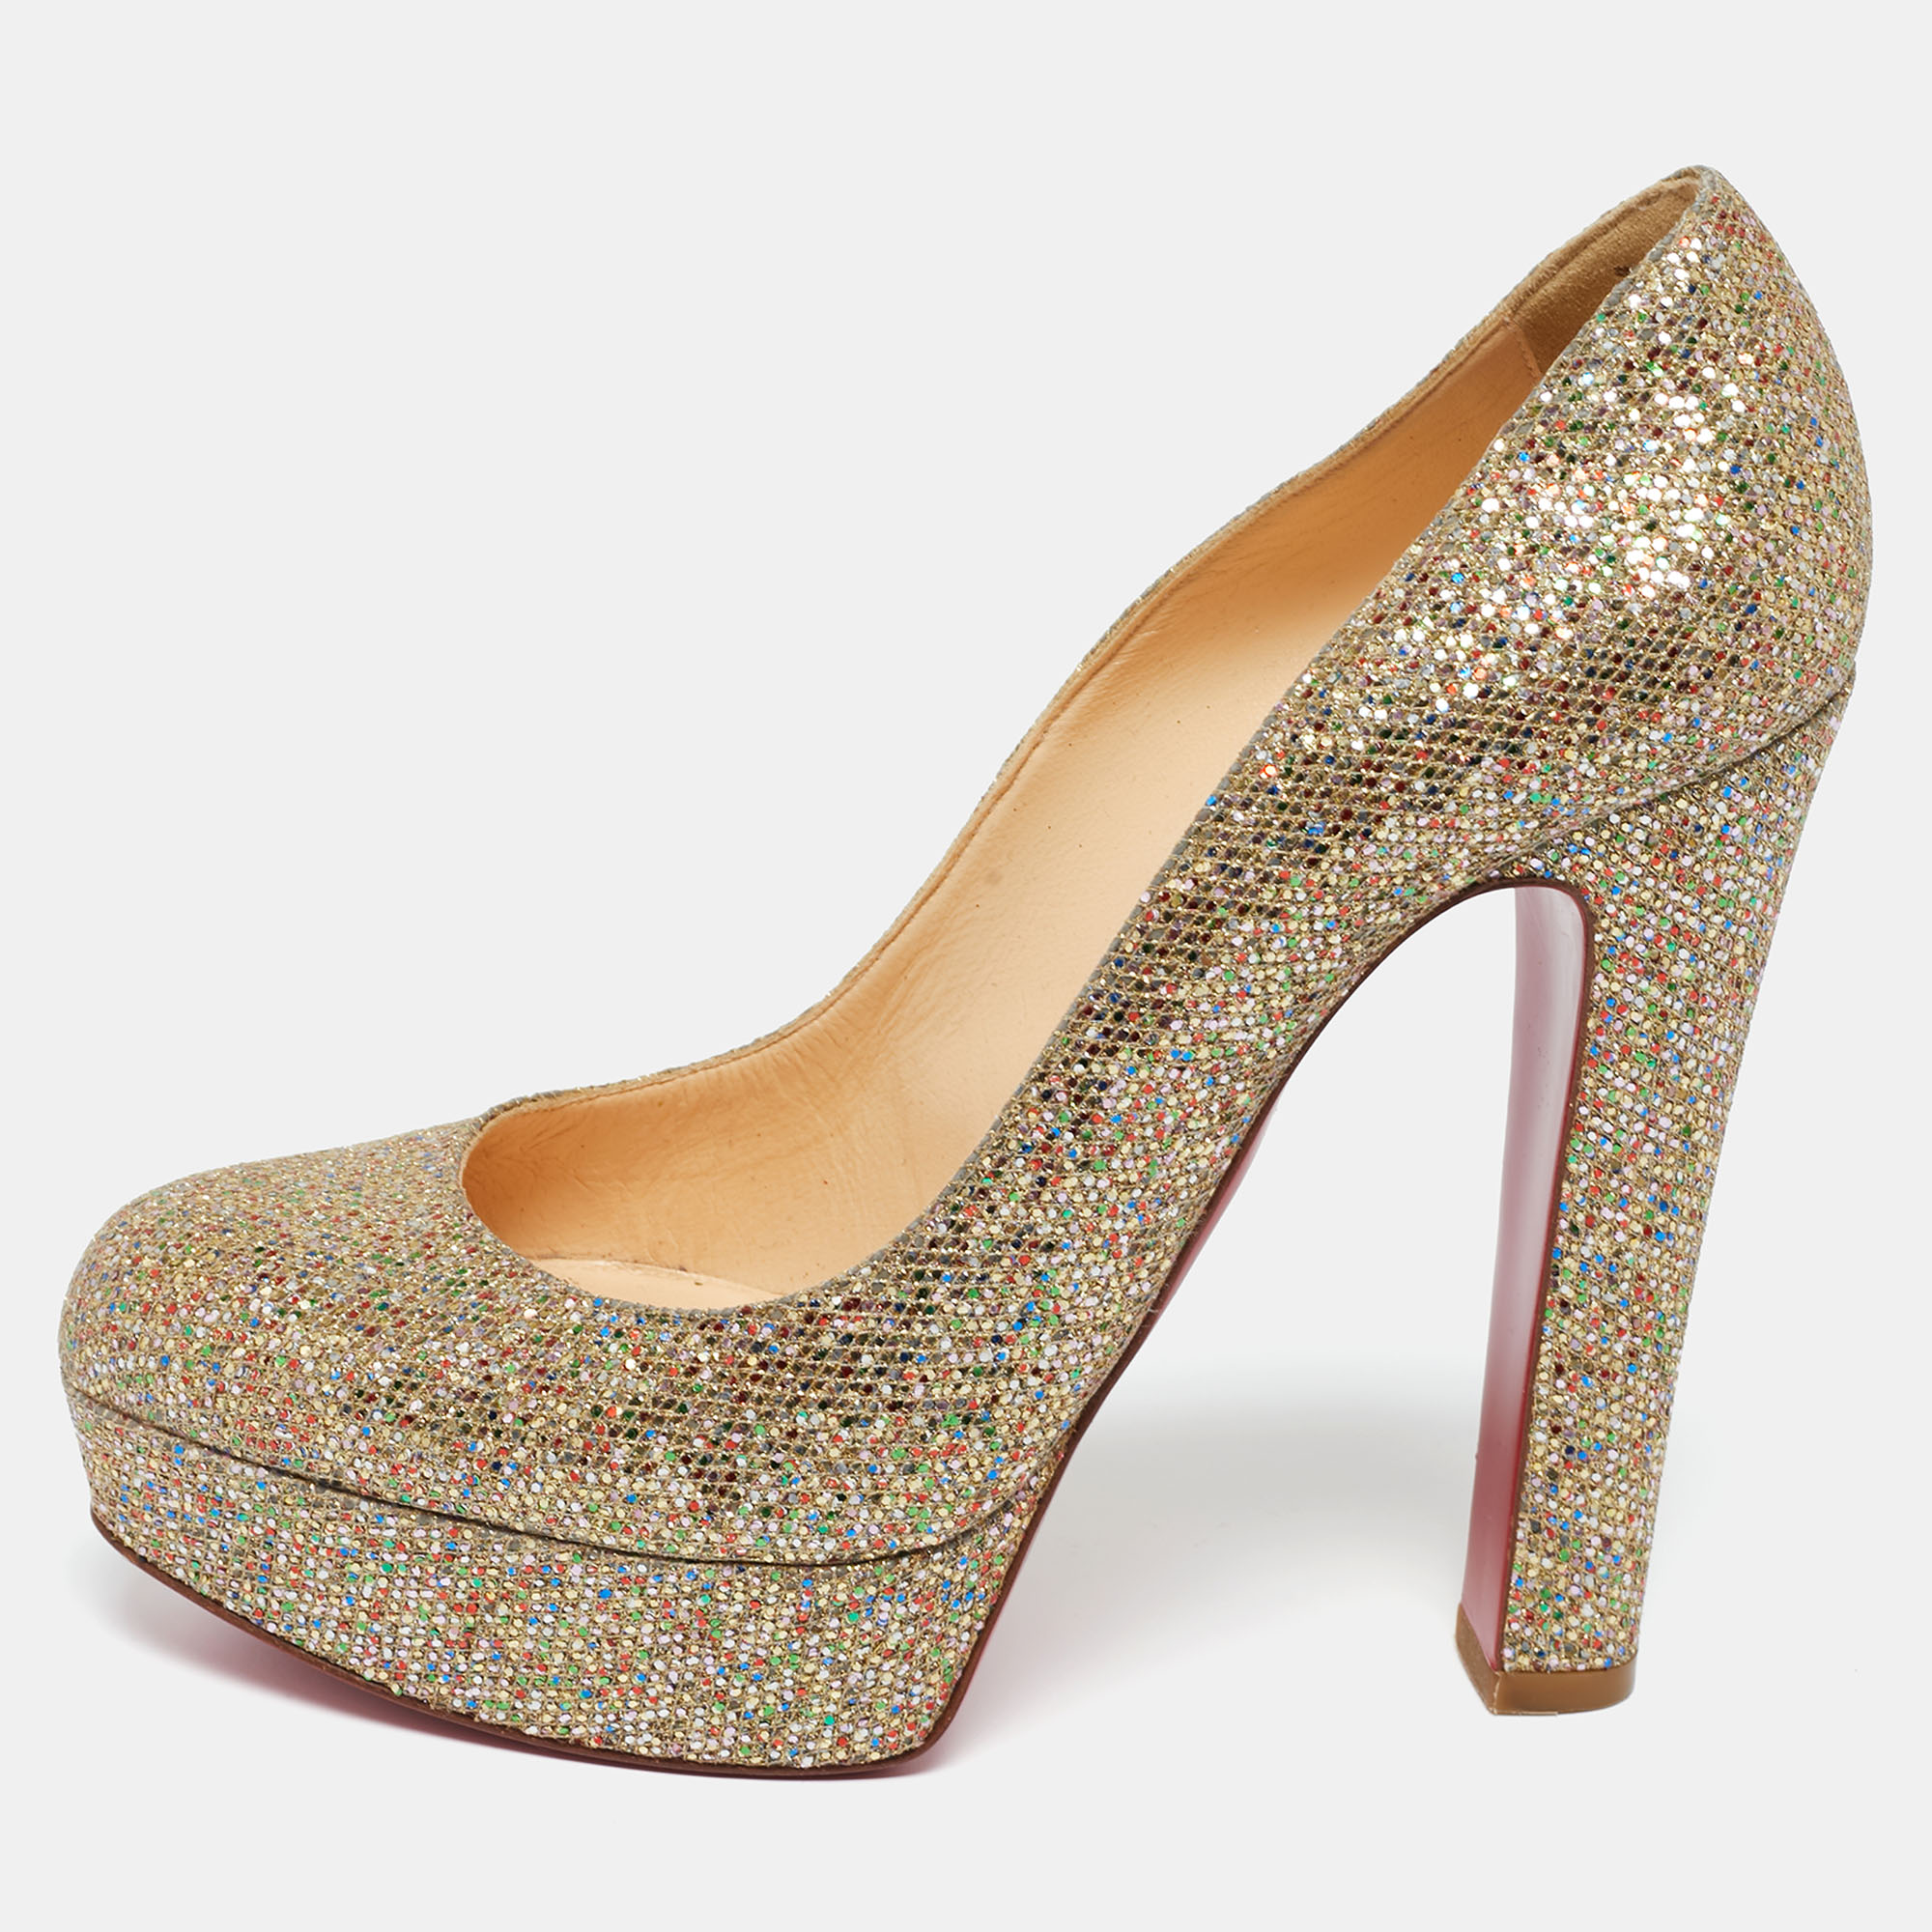 Feel glamorous every time you slip into this glitzy pair by Christian Louboutin. Covered in gold glitter and balanced on platforms and 12.5 cm heels these pumps will be a winner with all your well tailored outfits. They are finished with the signature red on the soles.